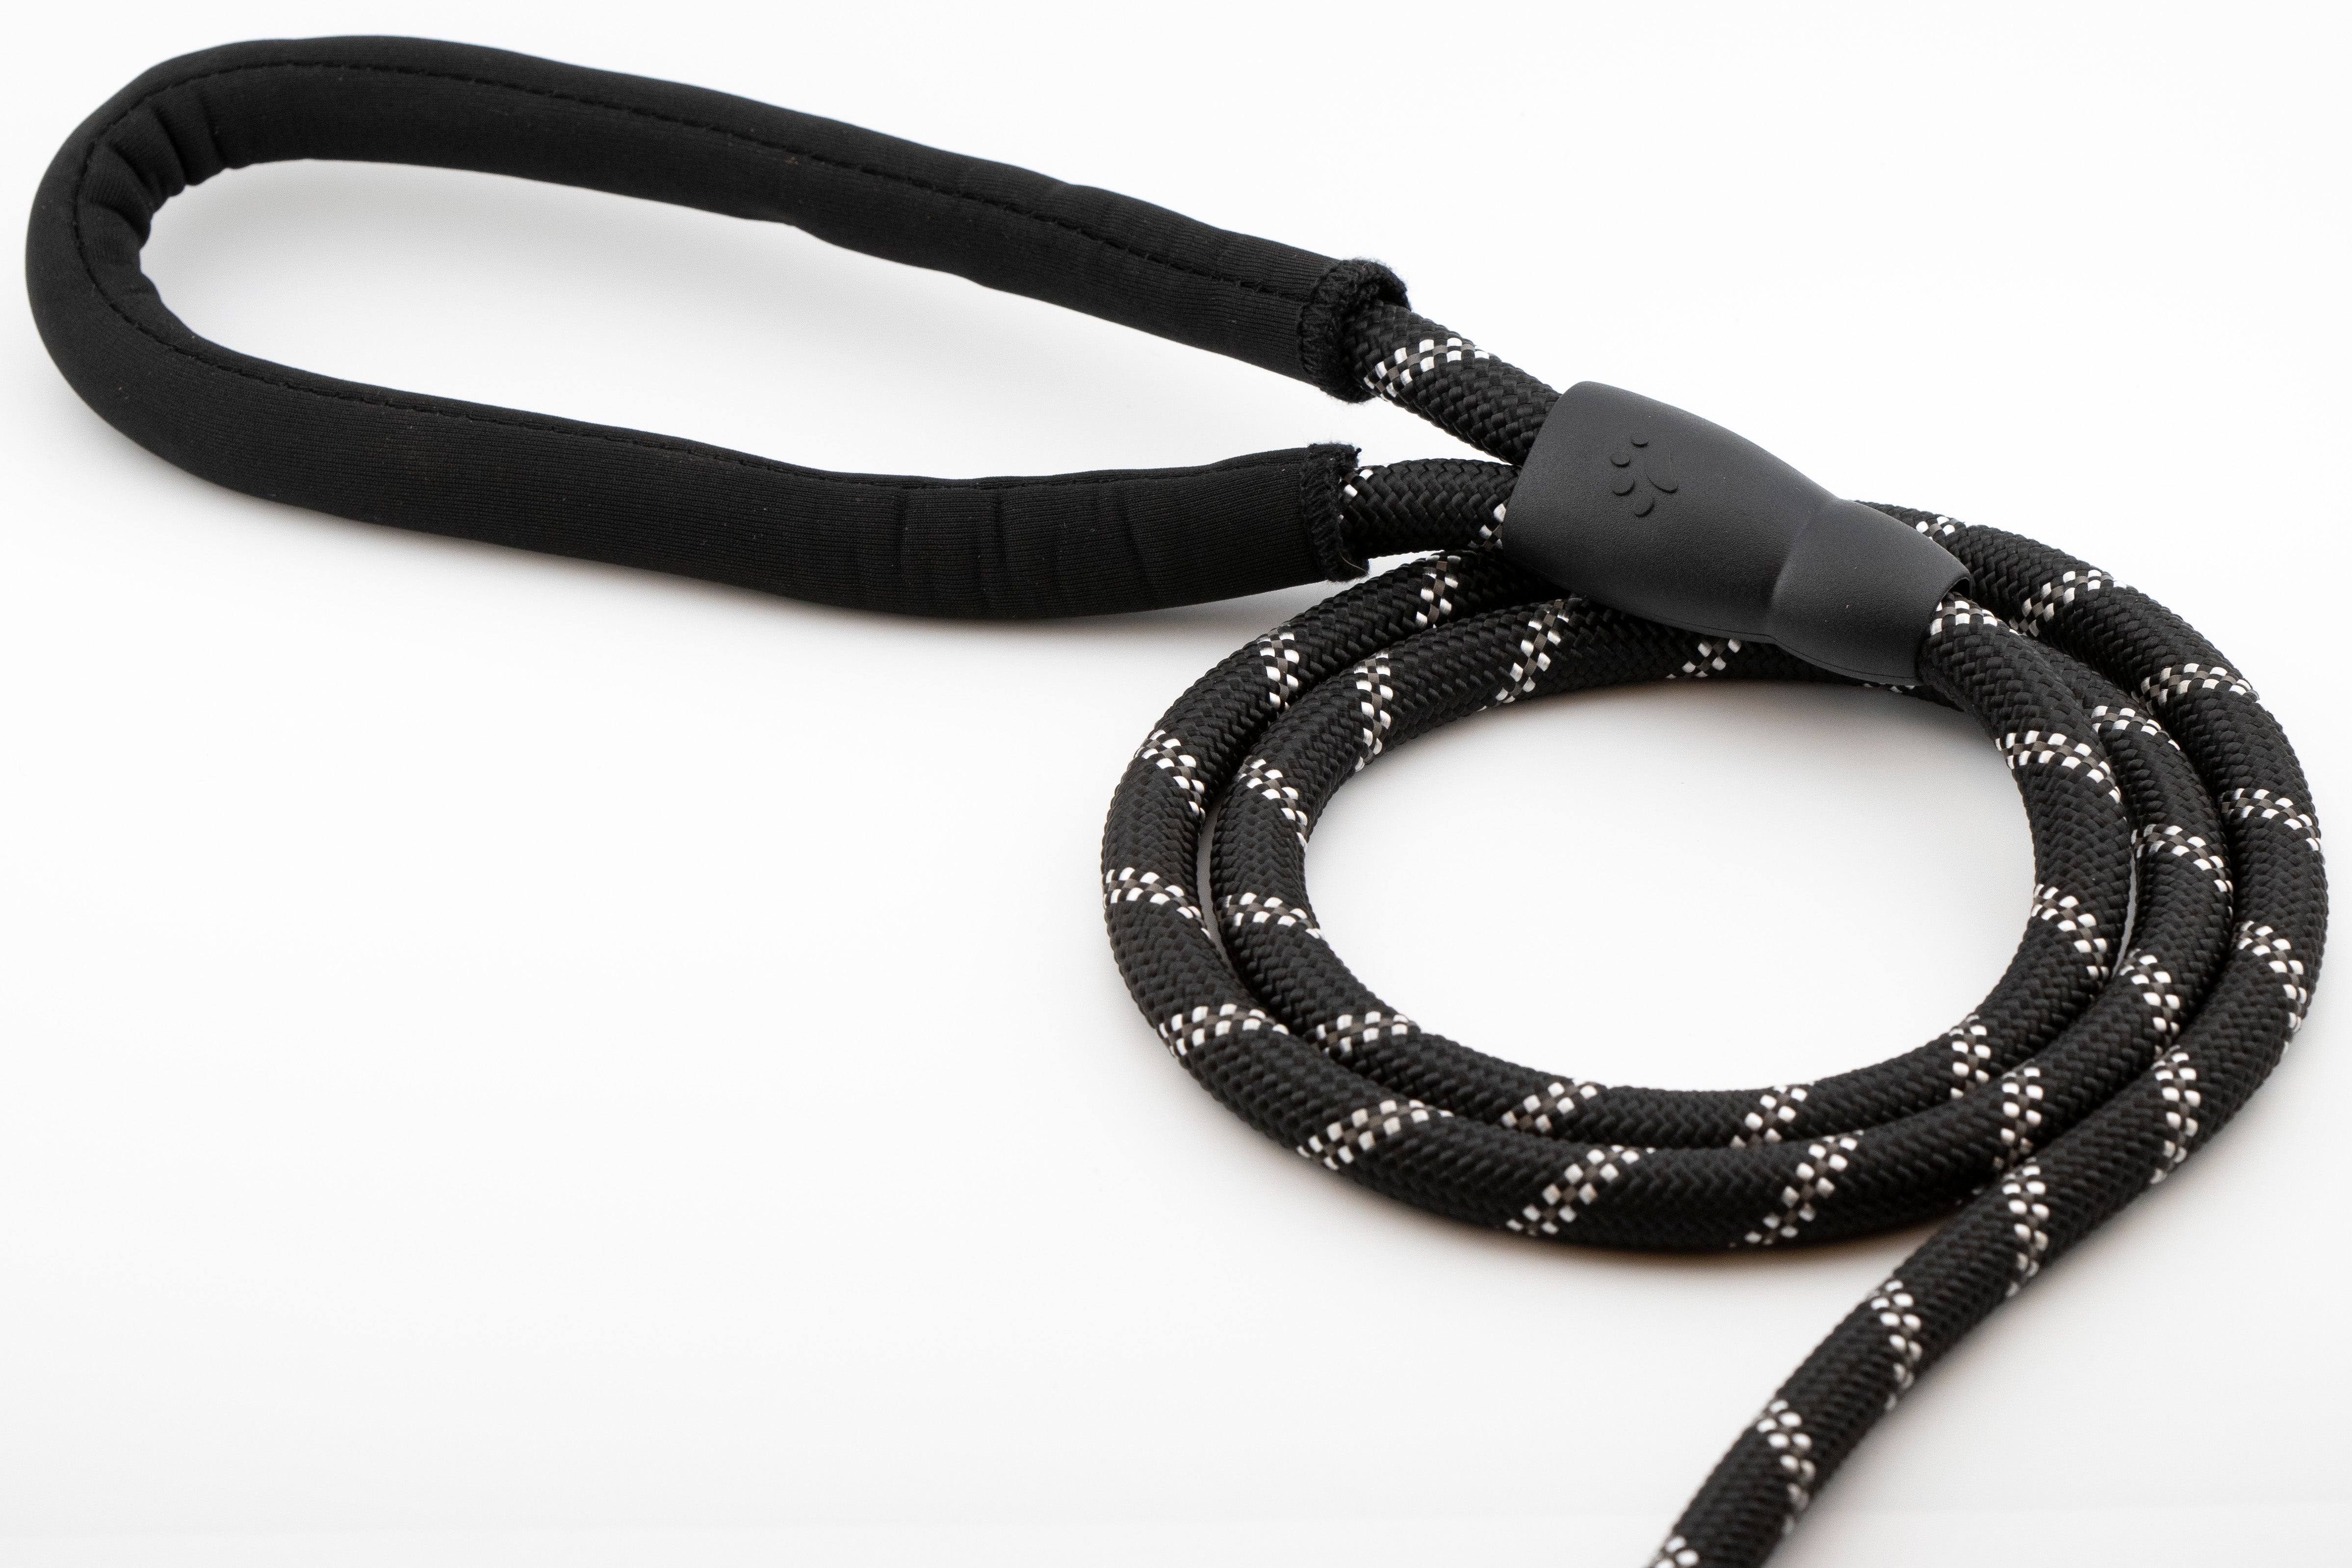 The Asher House Leash - 5 Colors